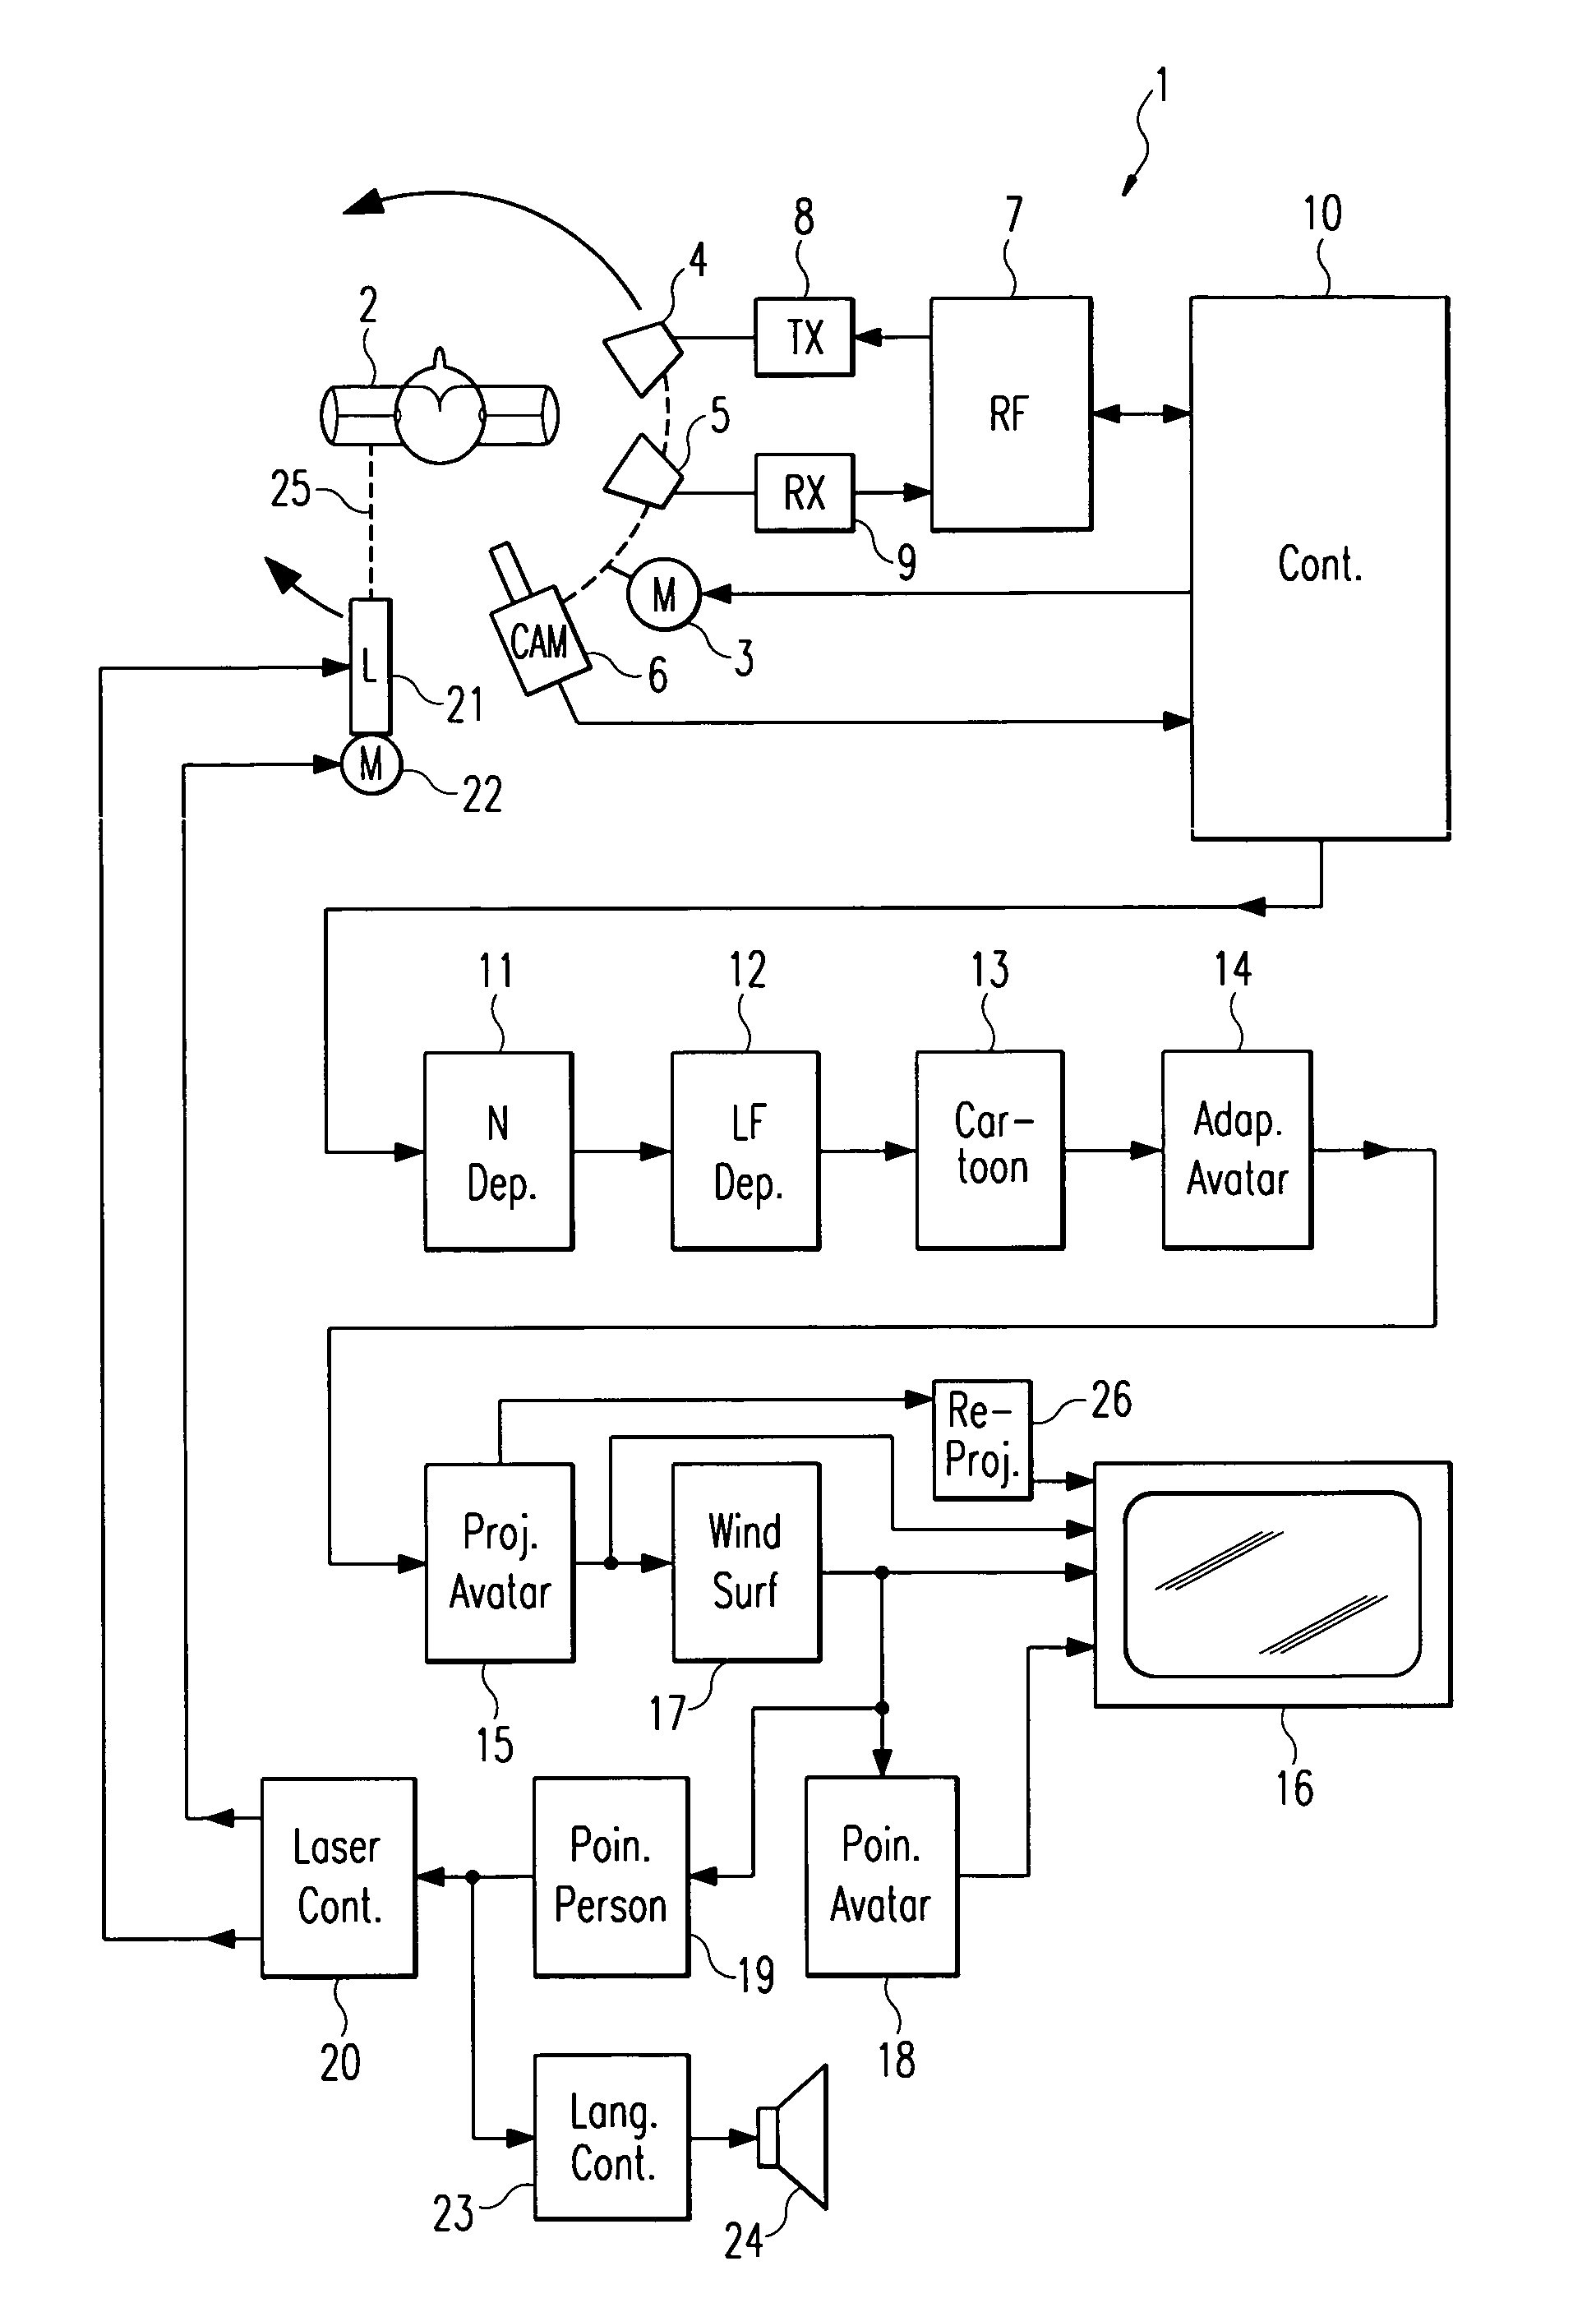 Method for capturing and displaying image data of an object